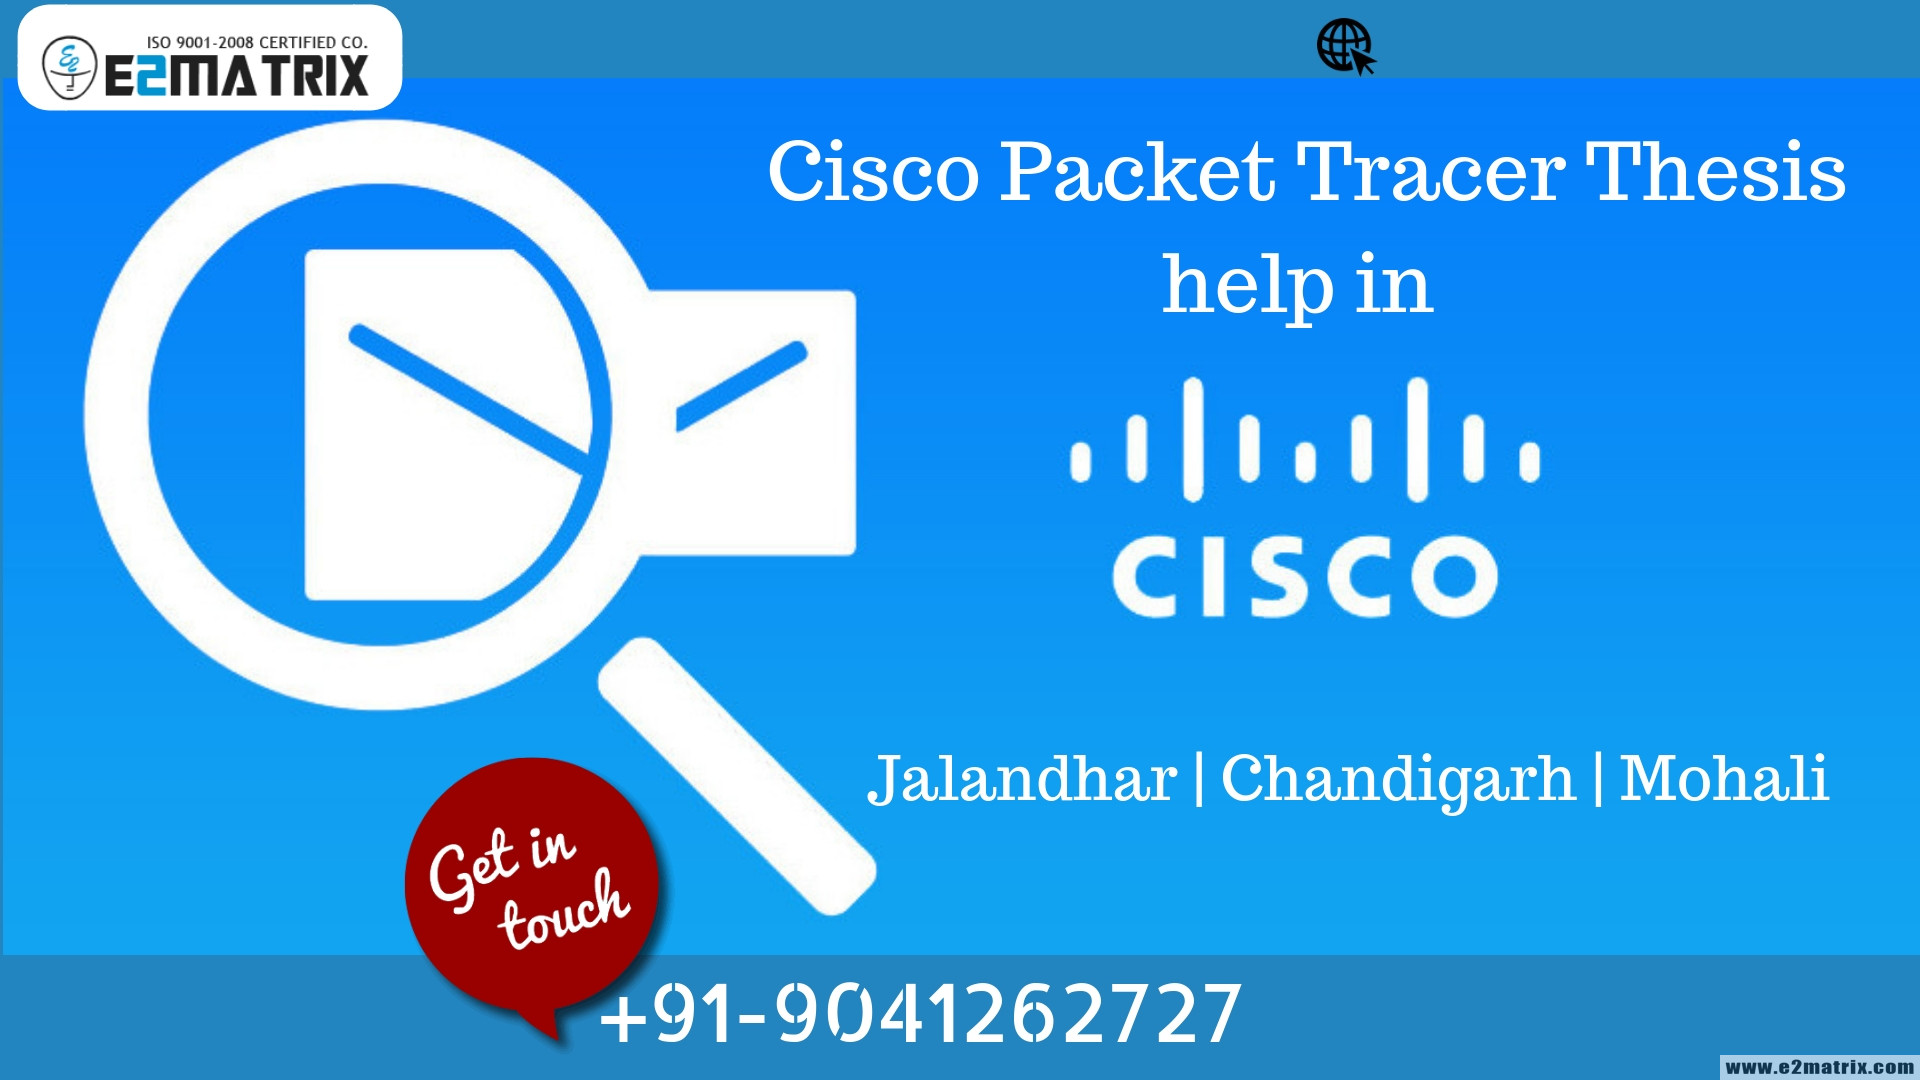 Cisco Packet Tracer Thesis help in Jalandhar | Chandigarh | Mohali